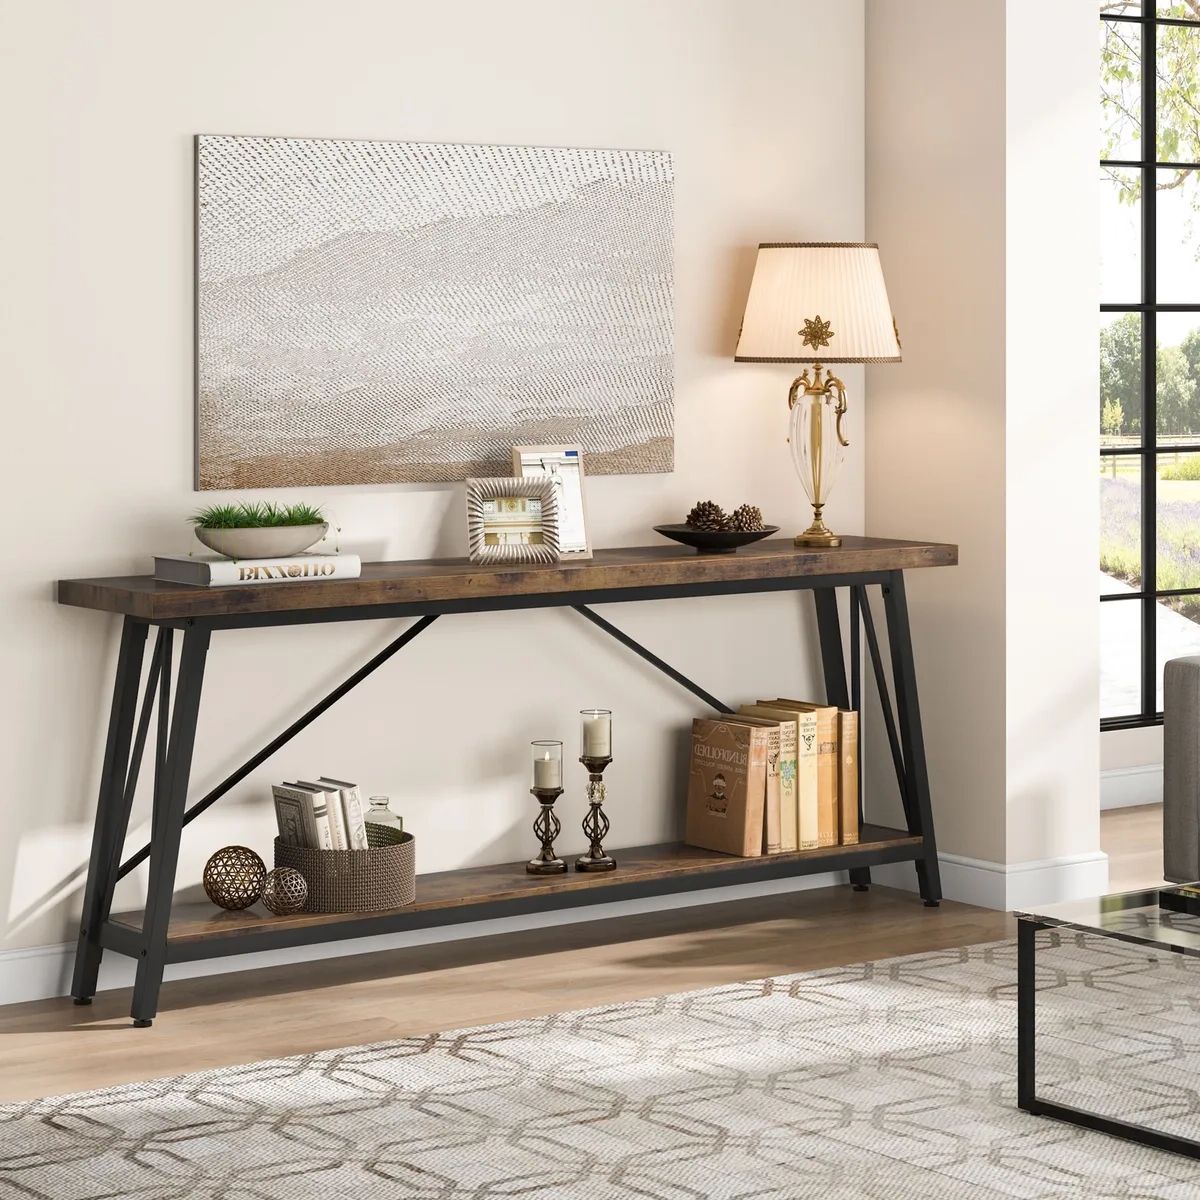 Long Narrow Console Table With Storage Behind Couch Sofa Table Entryway  Hallway | Ebay In Asymmetrical Console Table Book Stands (Gallery 6 of 20)